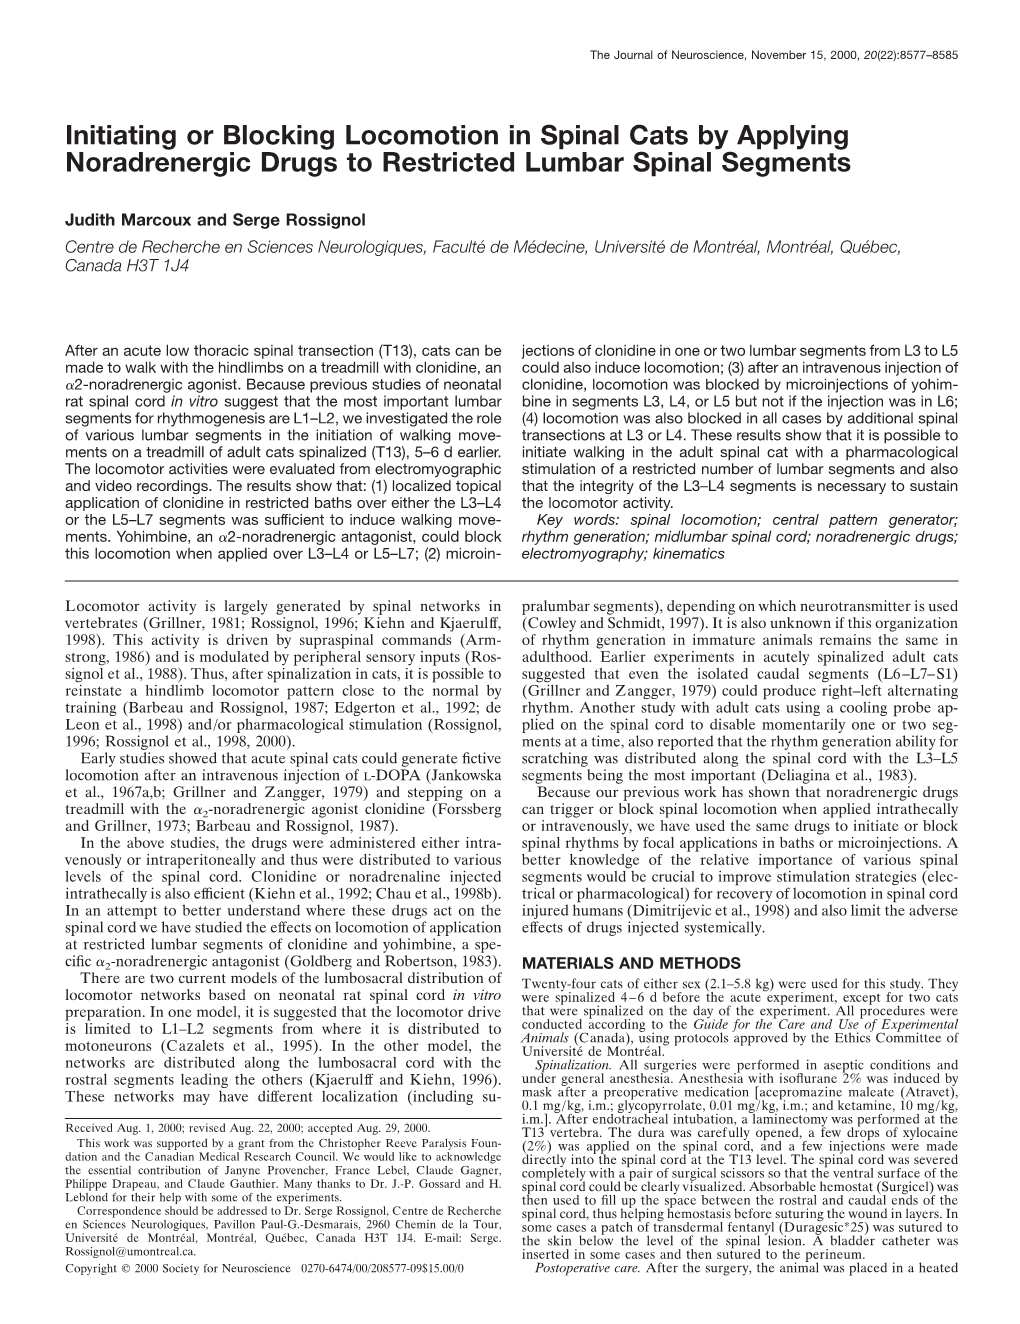 Initiating Or Blocking Locomotion in Spinal Cats by Applying Noradrenergic Drugs to Restricted Lumbar Spinal Segments